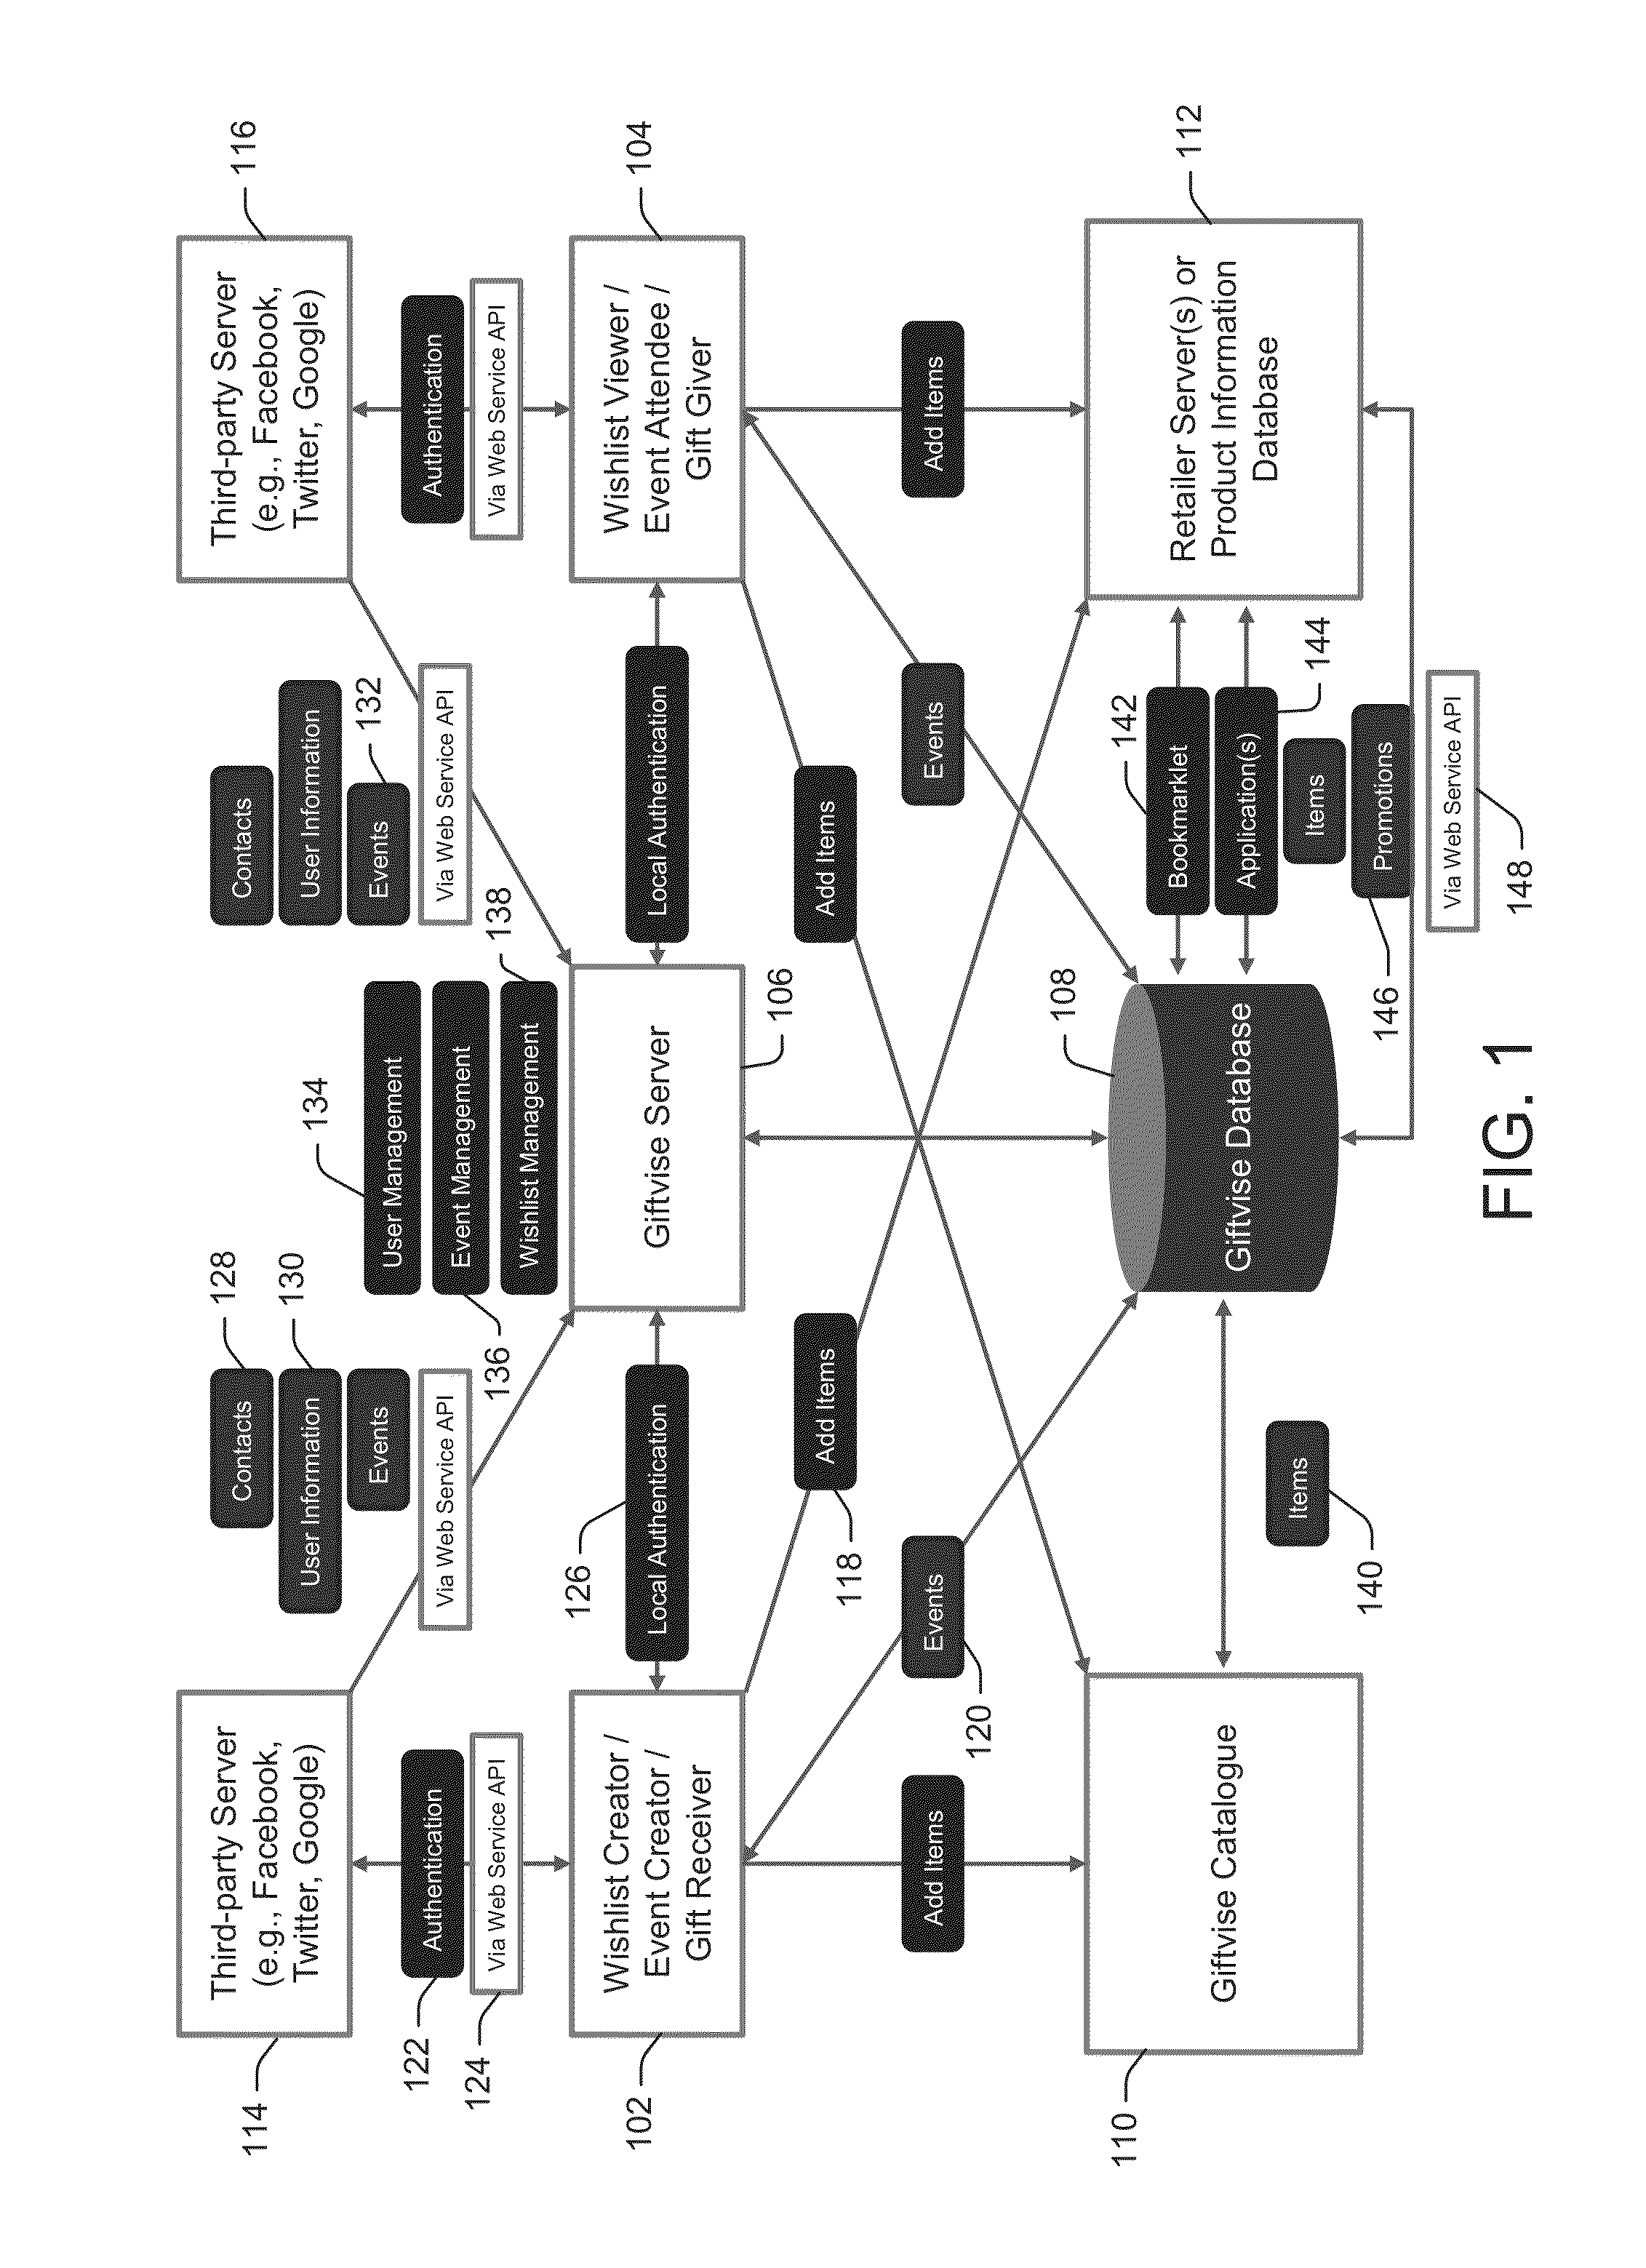 Systems and methods for event-based gift giving and receiving